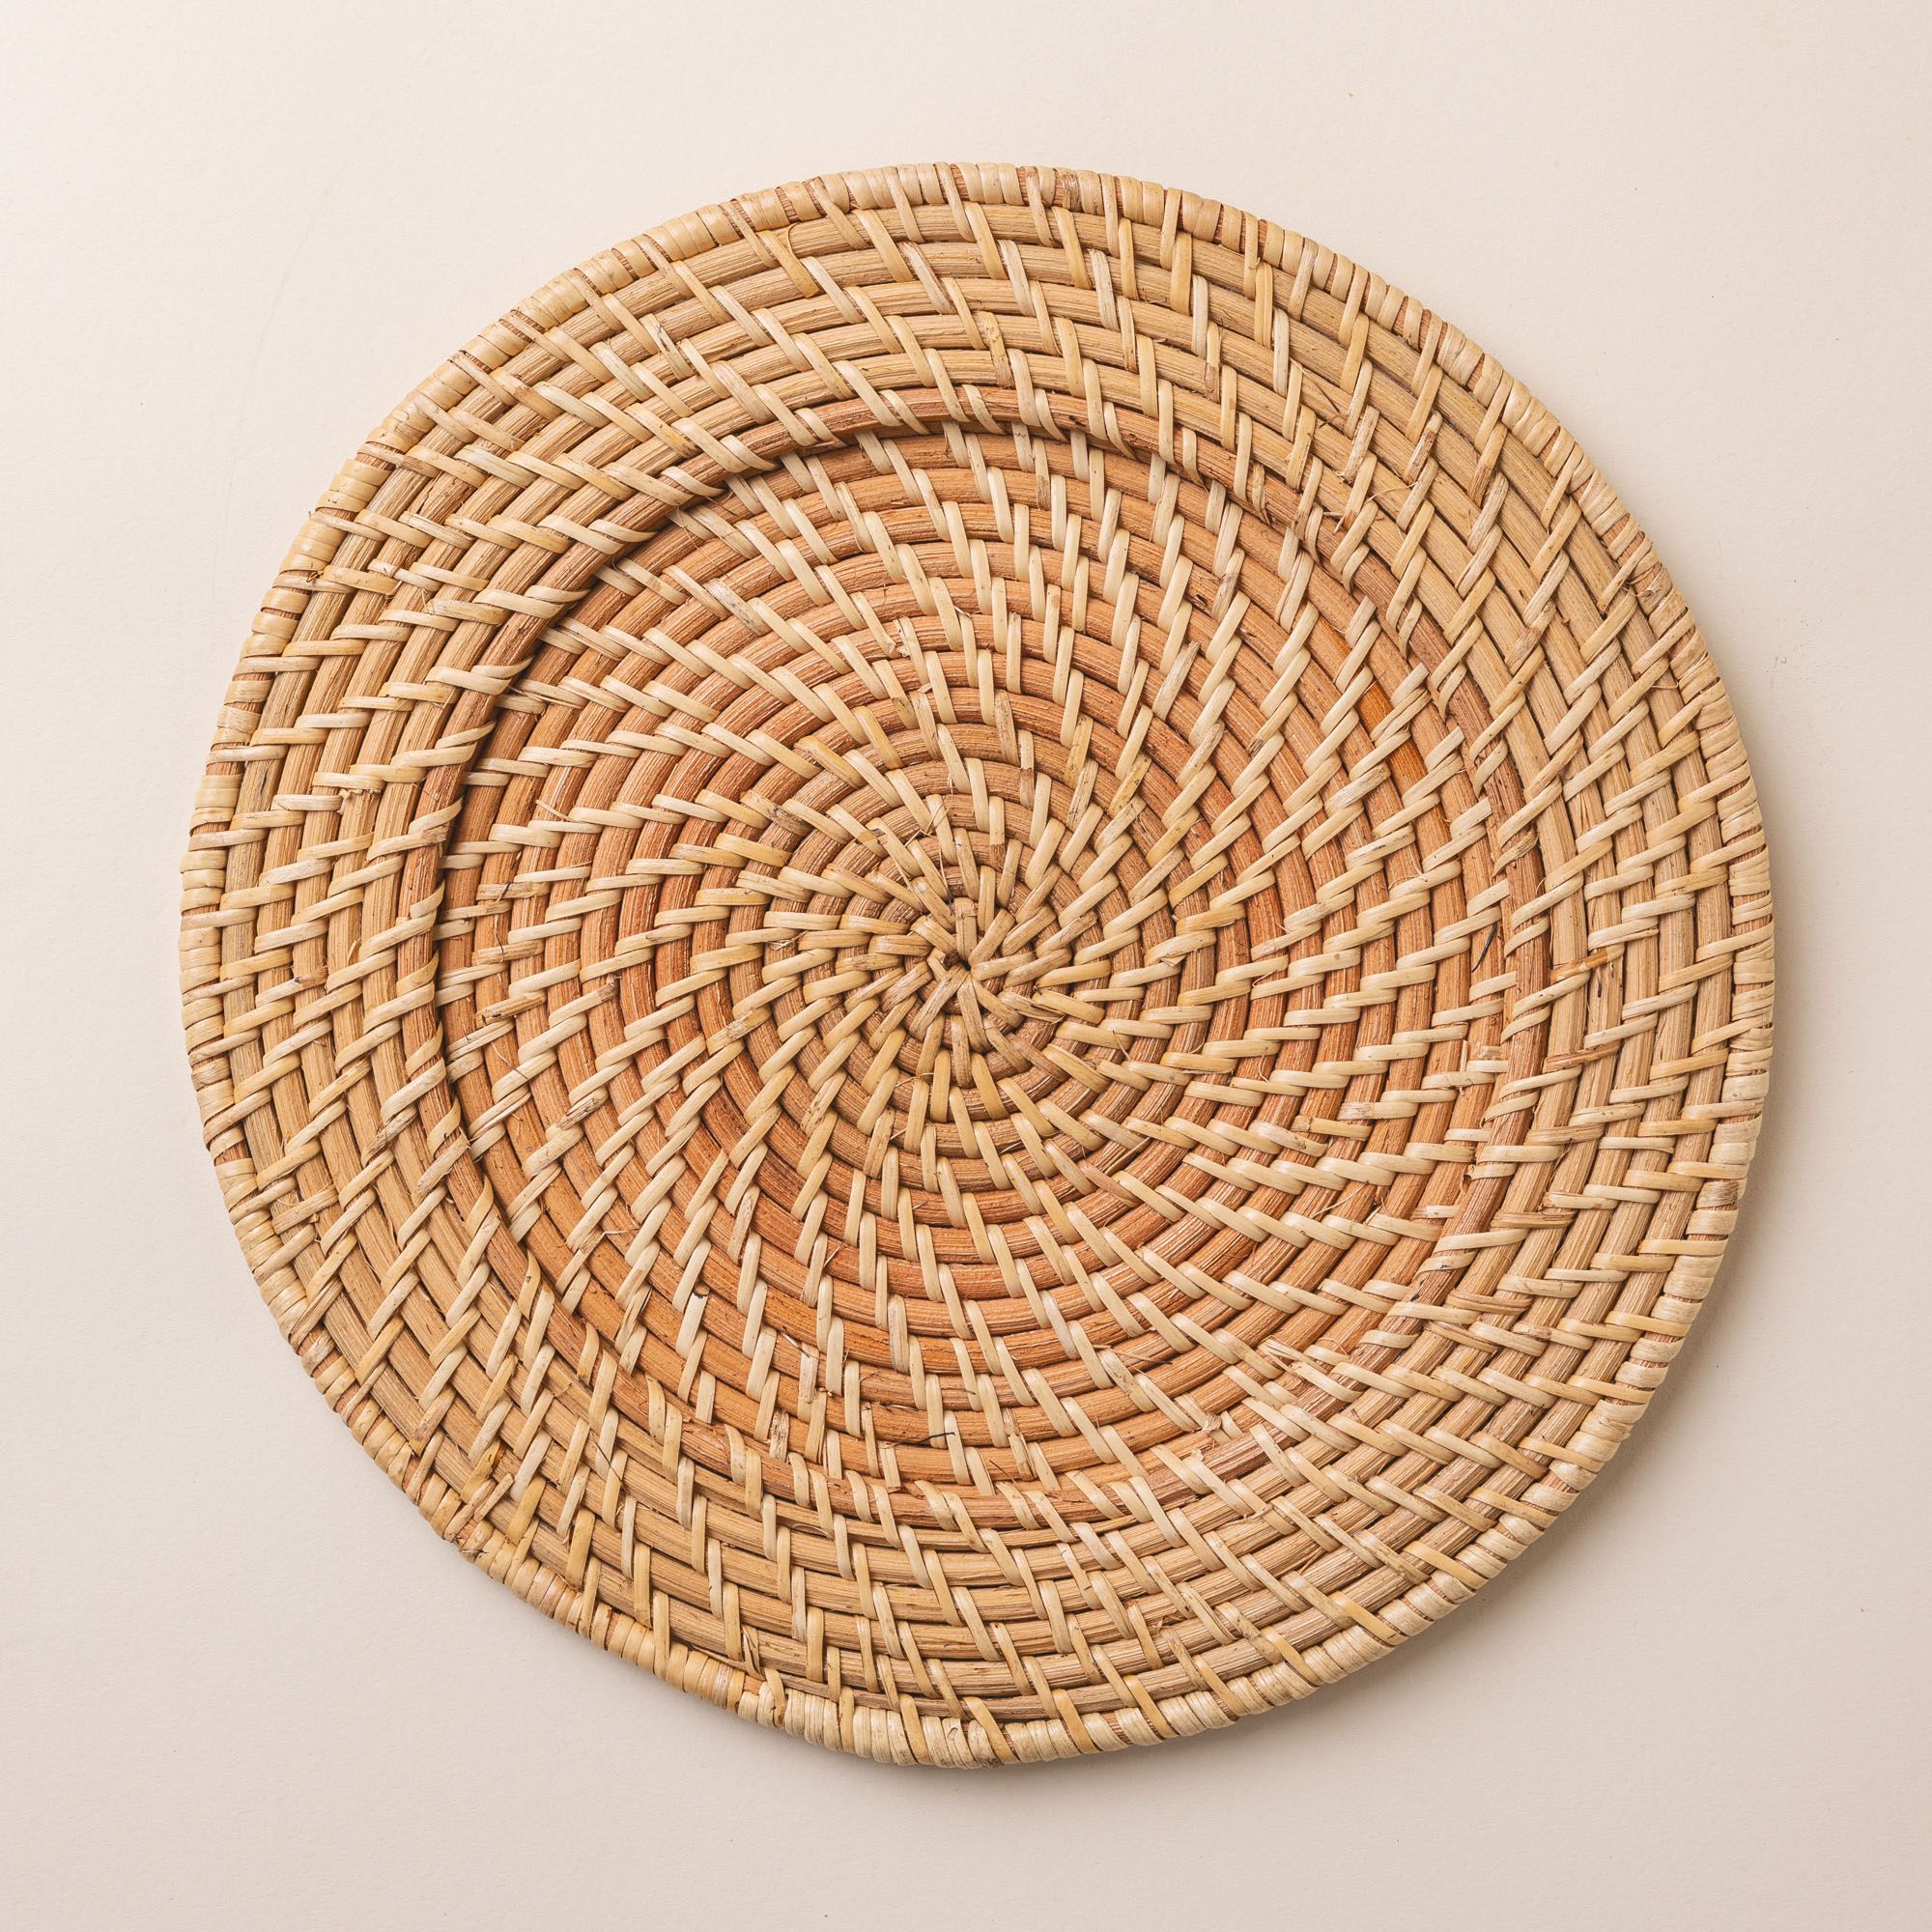 One natural hand woven dinner plate charger.